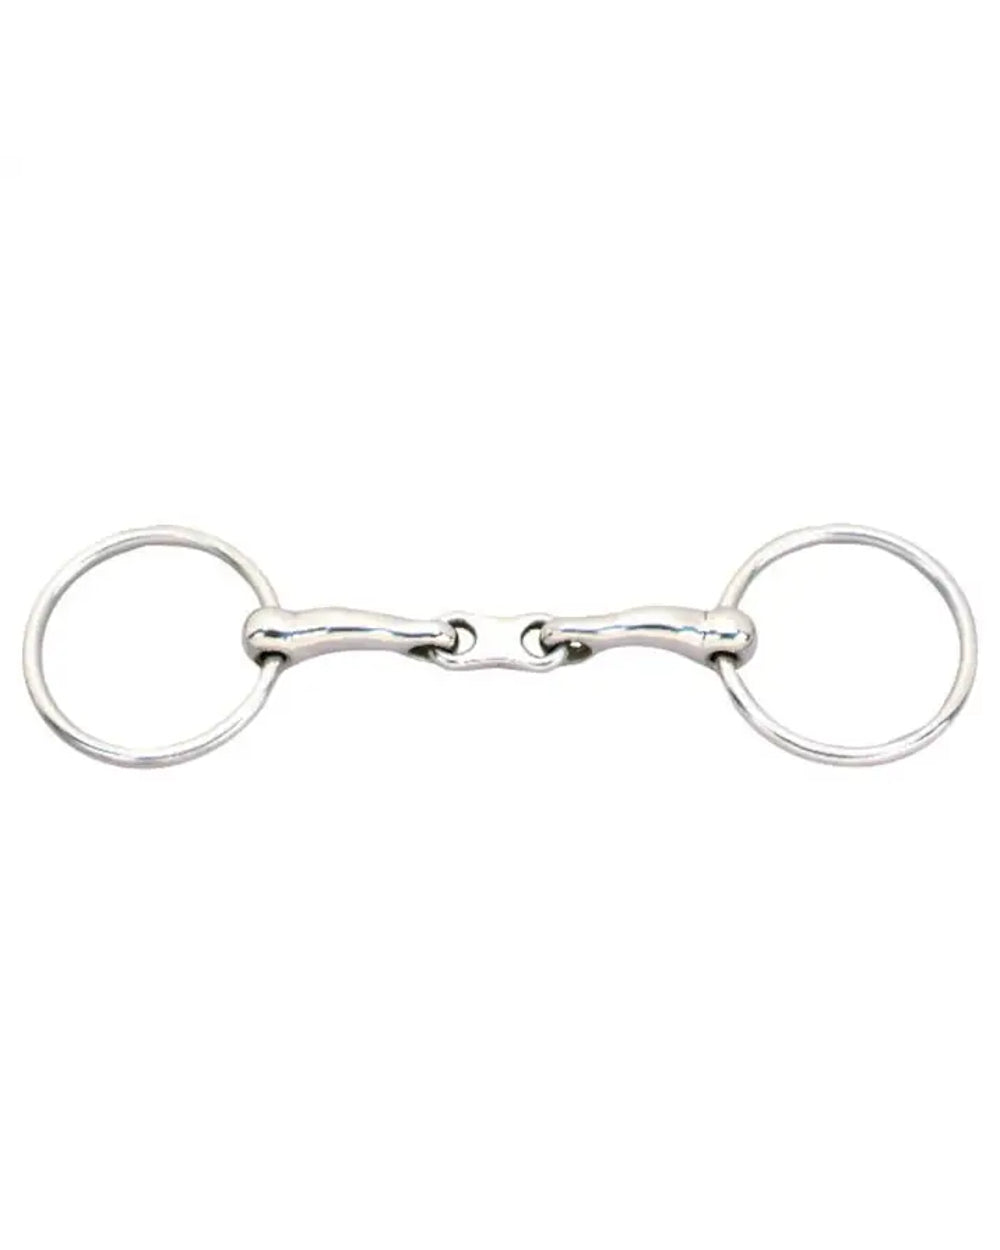 JP Korsteel Stainless Steel French Link Loose Ring Snaffle Bit on white background